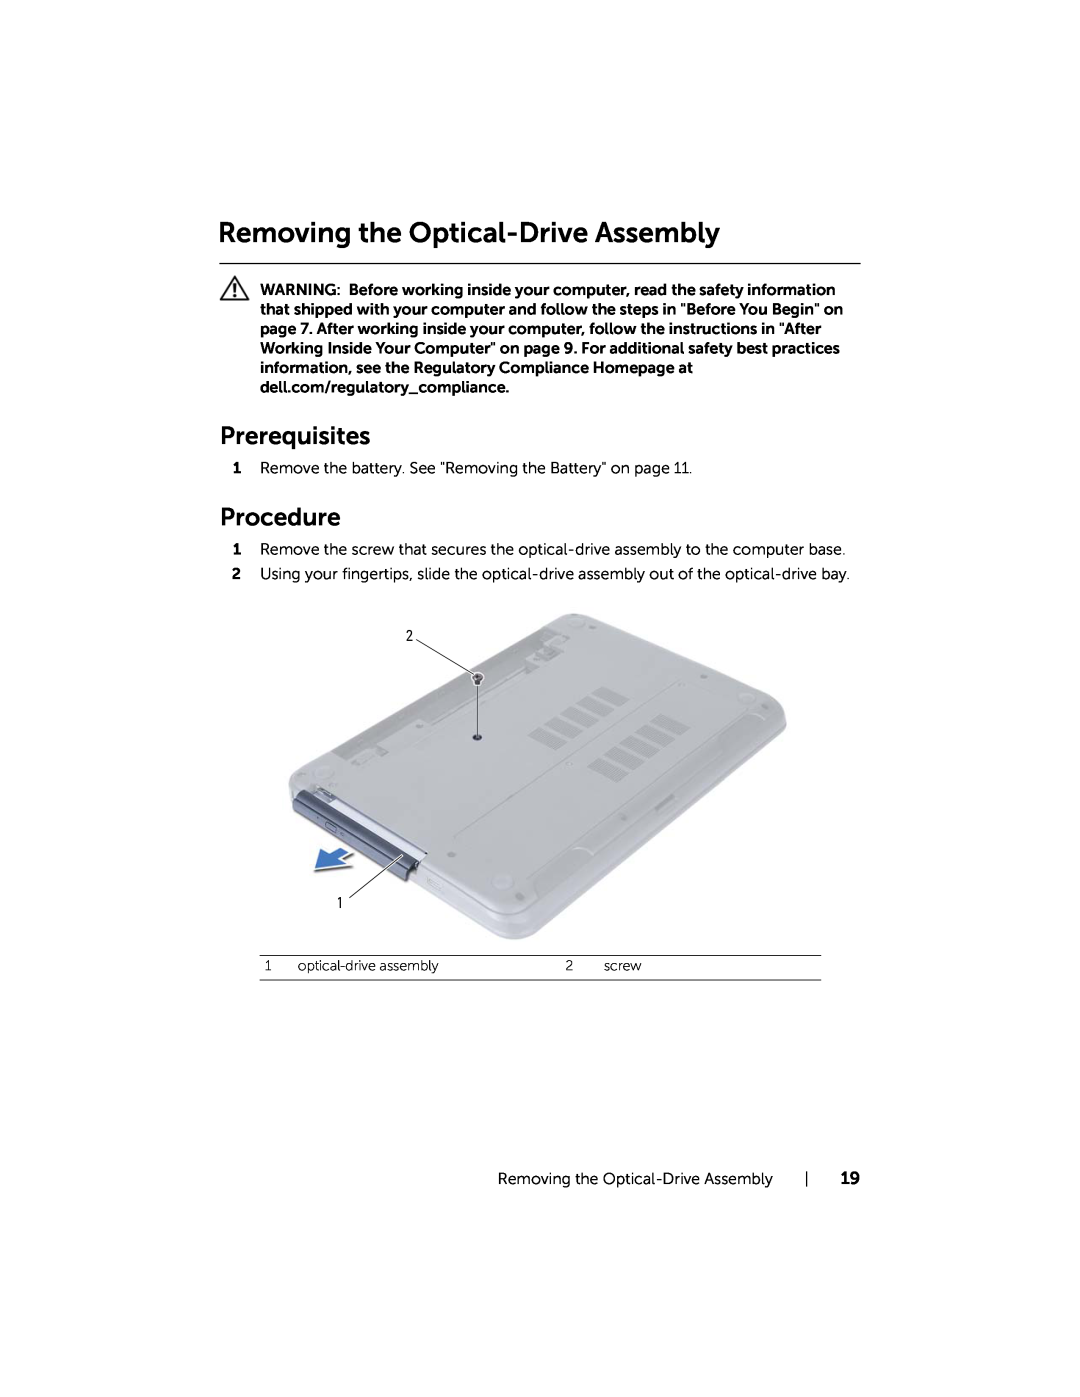 Dell 5521, 3521 manual Removing the Optical-Drive Assembly, Prerequisites, Procedure, optical-drive assembly, screw 